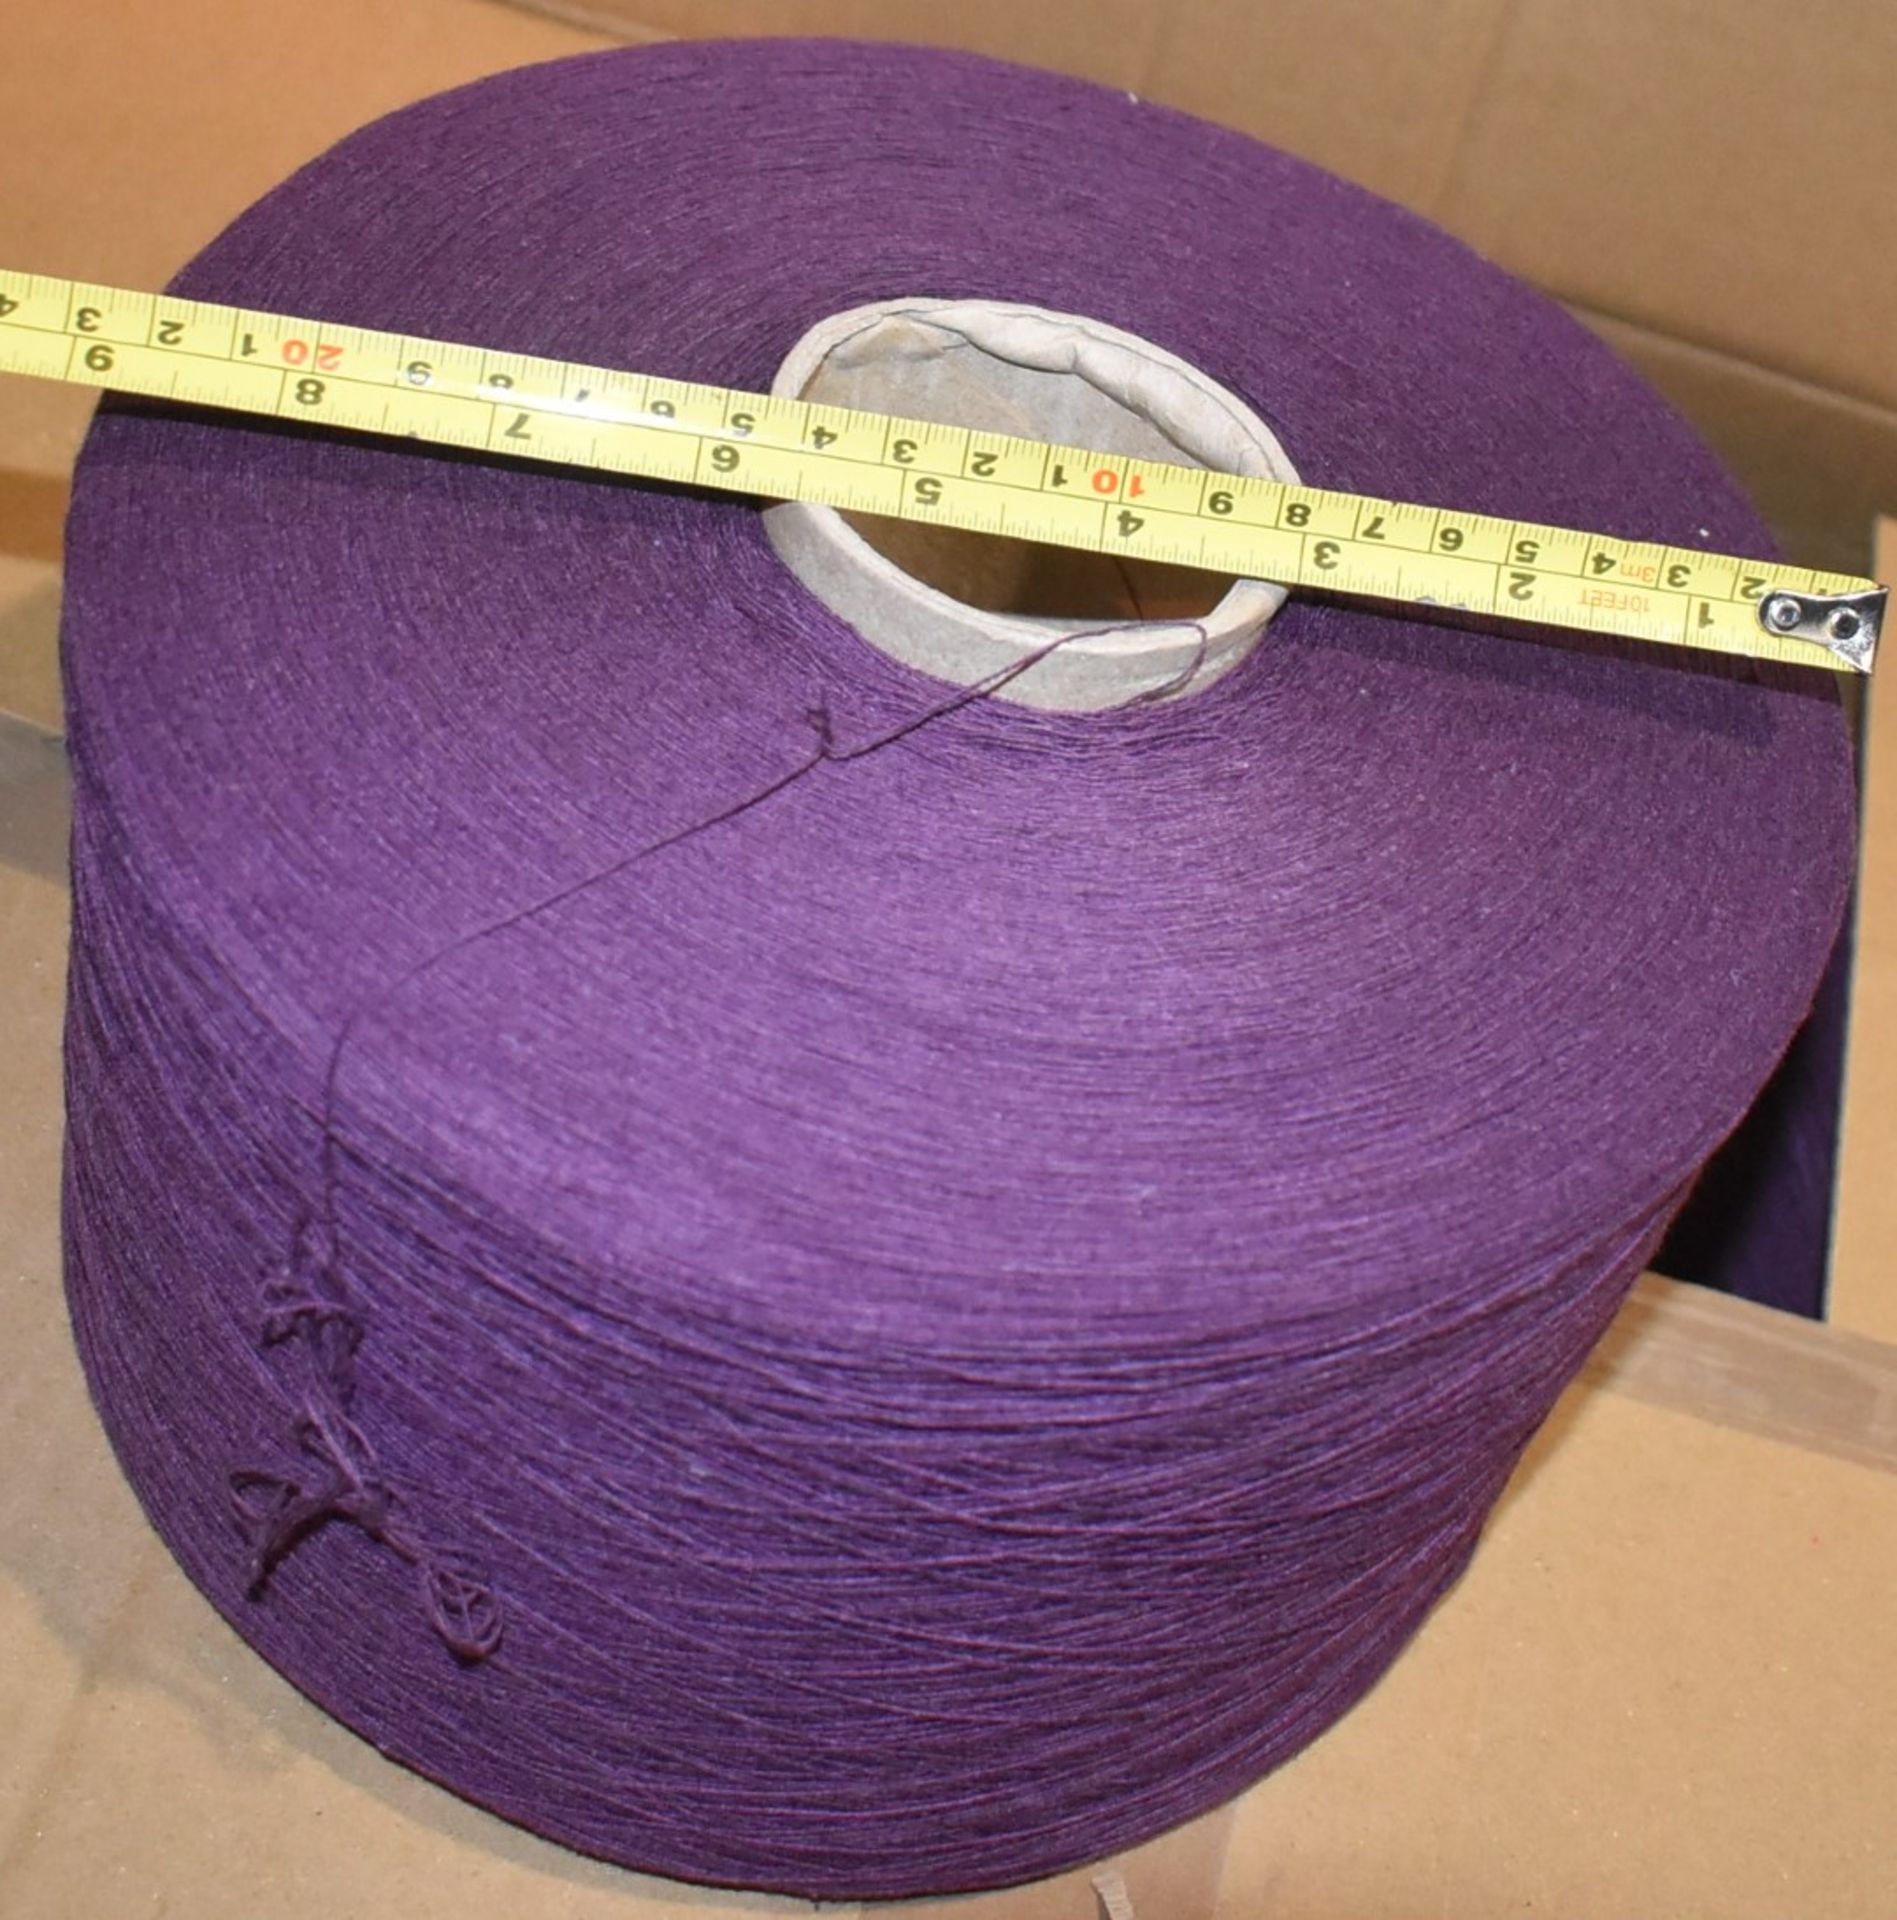 6 x Cones of 1/13 MicroCotton Knitting Yarn - Purple - Approx Weight: 2,300g - New Stock ABL Yarn - Image 13 of 15